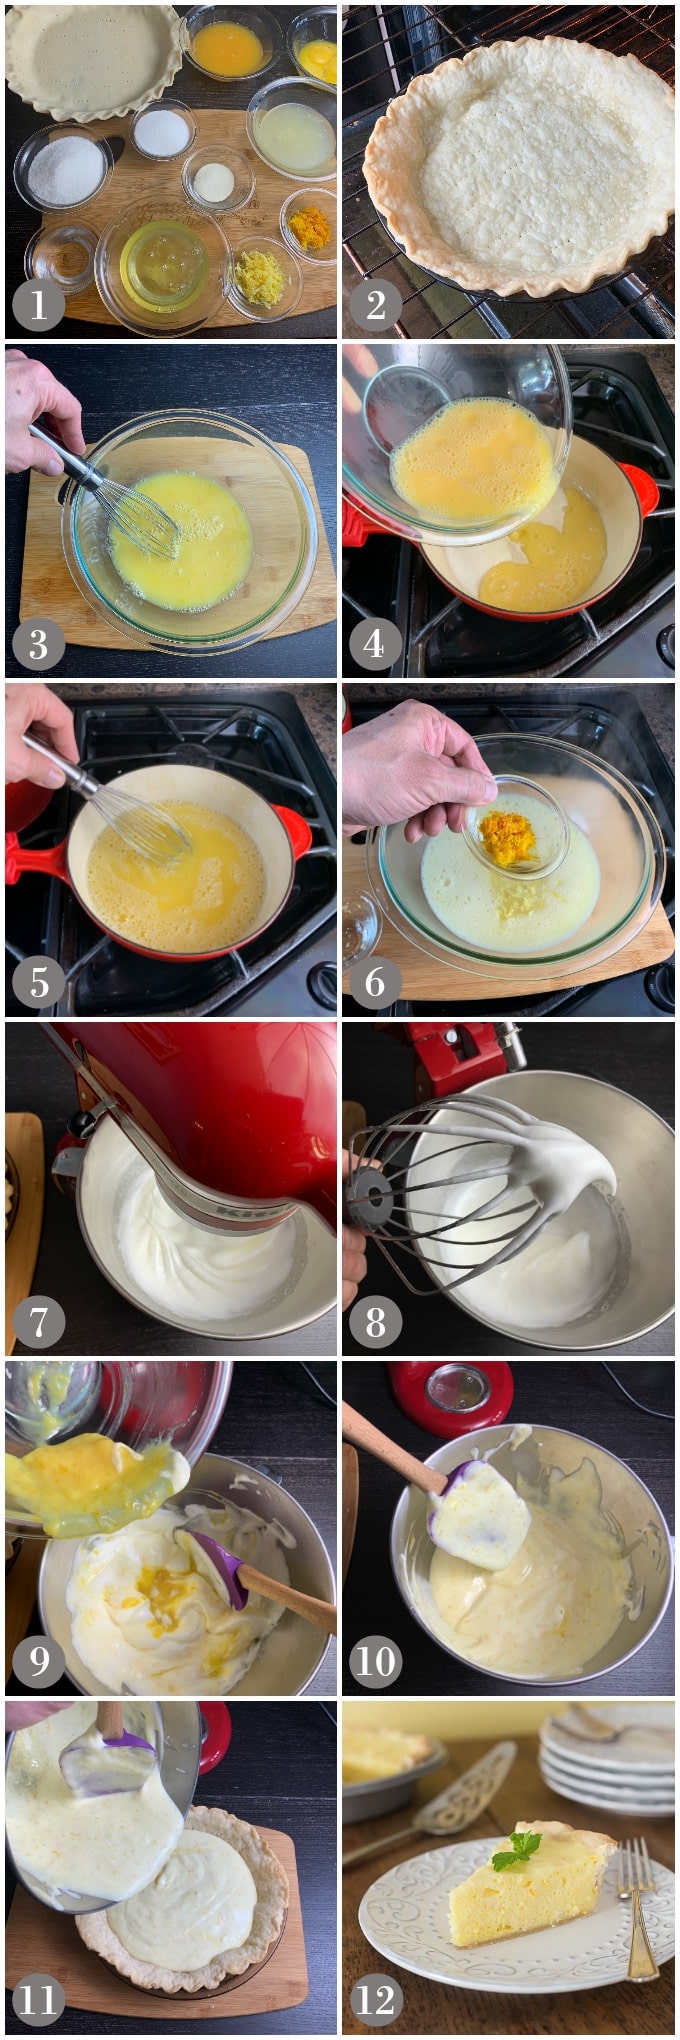 A collage of photos showing steps to make orange and lemon chiffon pie with a stand mixer.